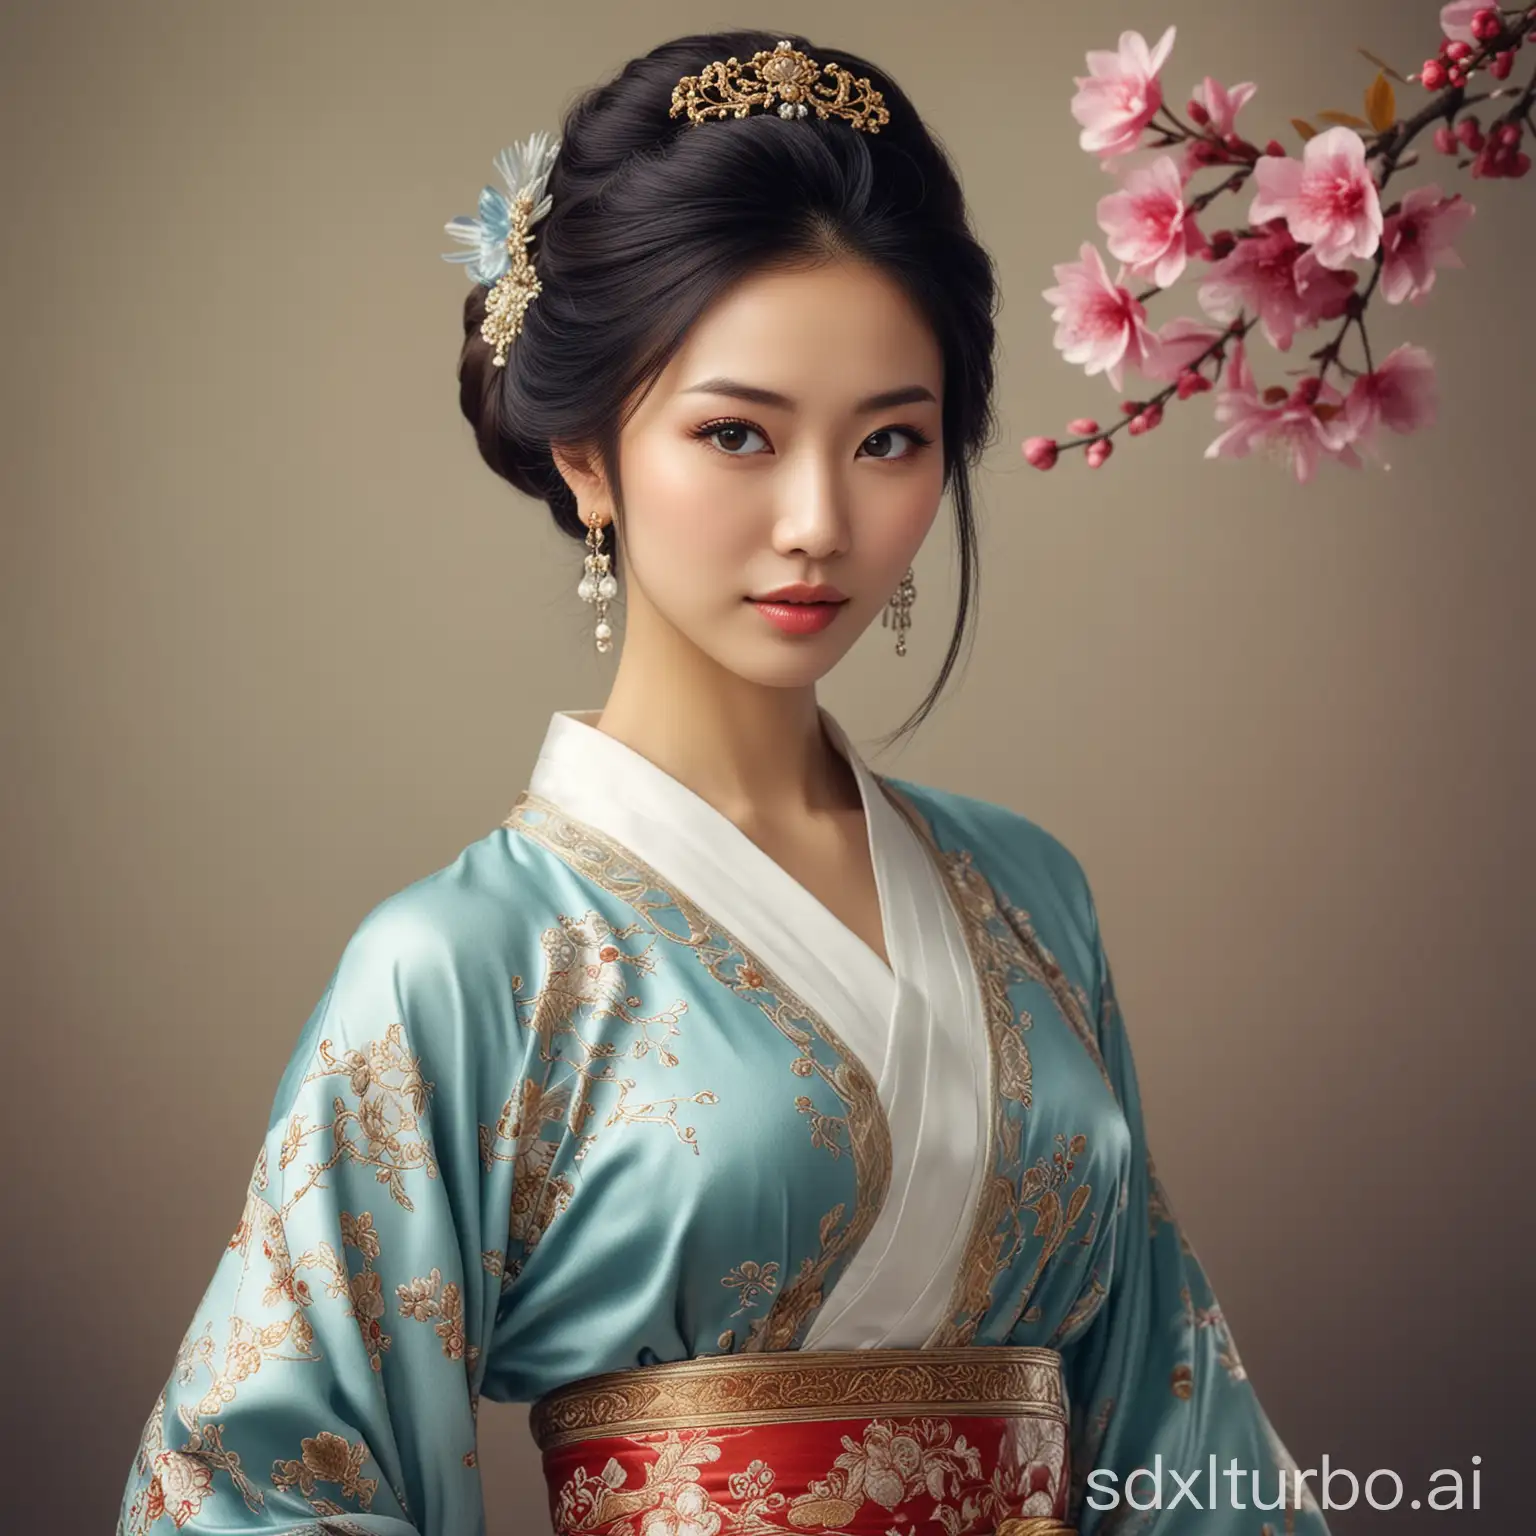 Beautiful woman, very good figure, oriental temperament, cultivated, cultured, wearing fashionable attire.